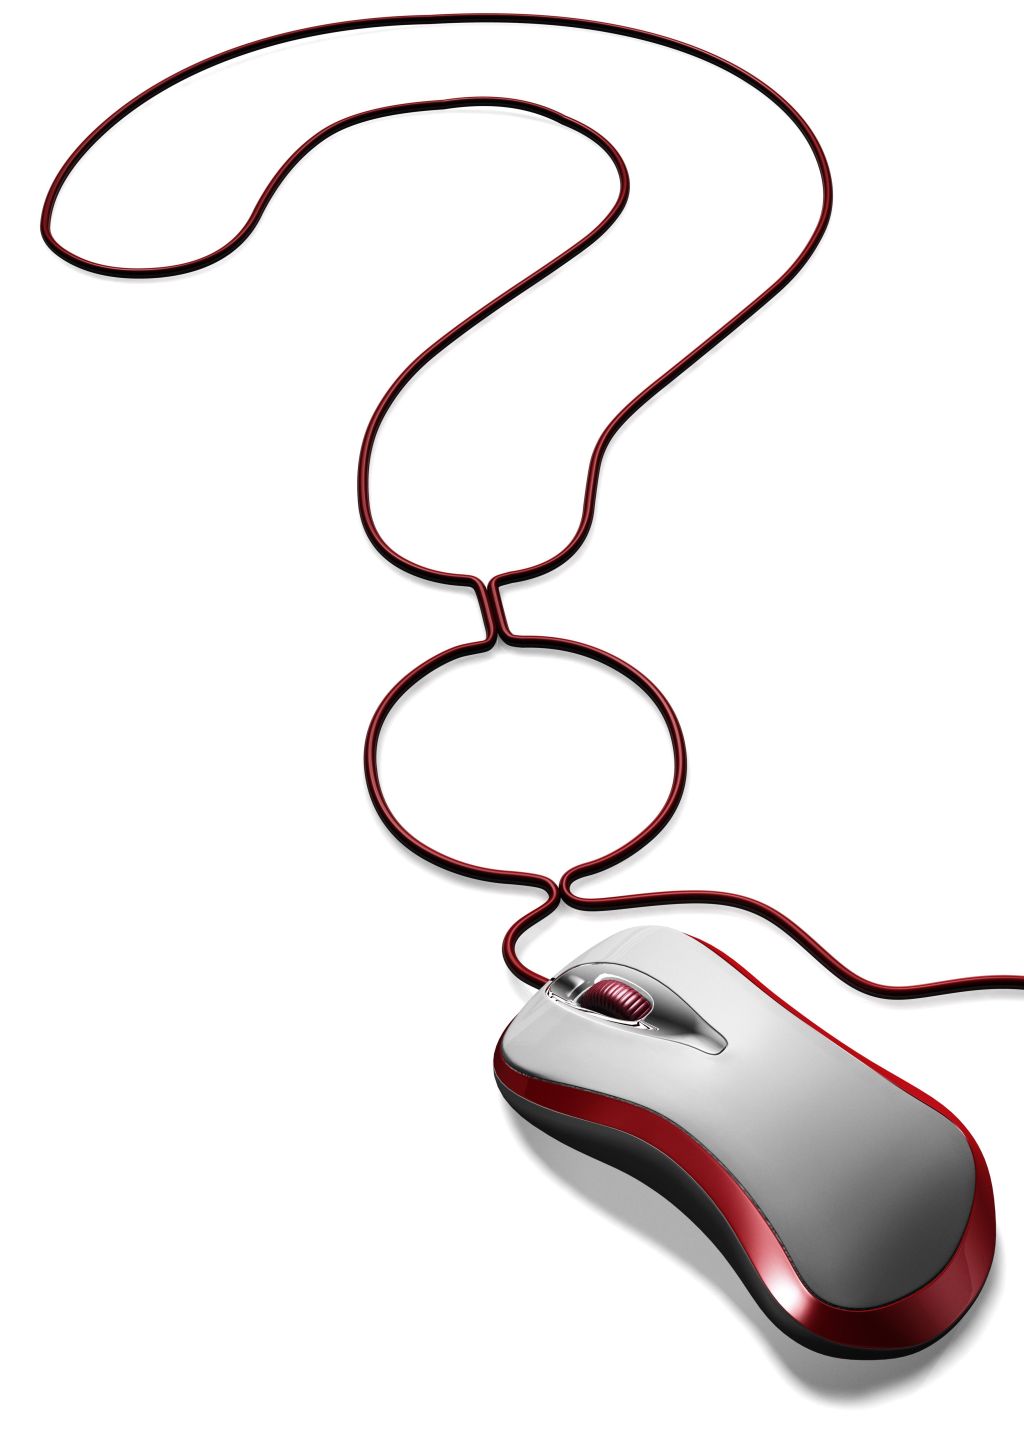 Computer mouse with cable forming a question mark